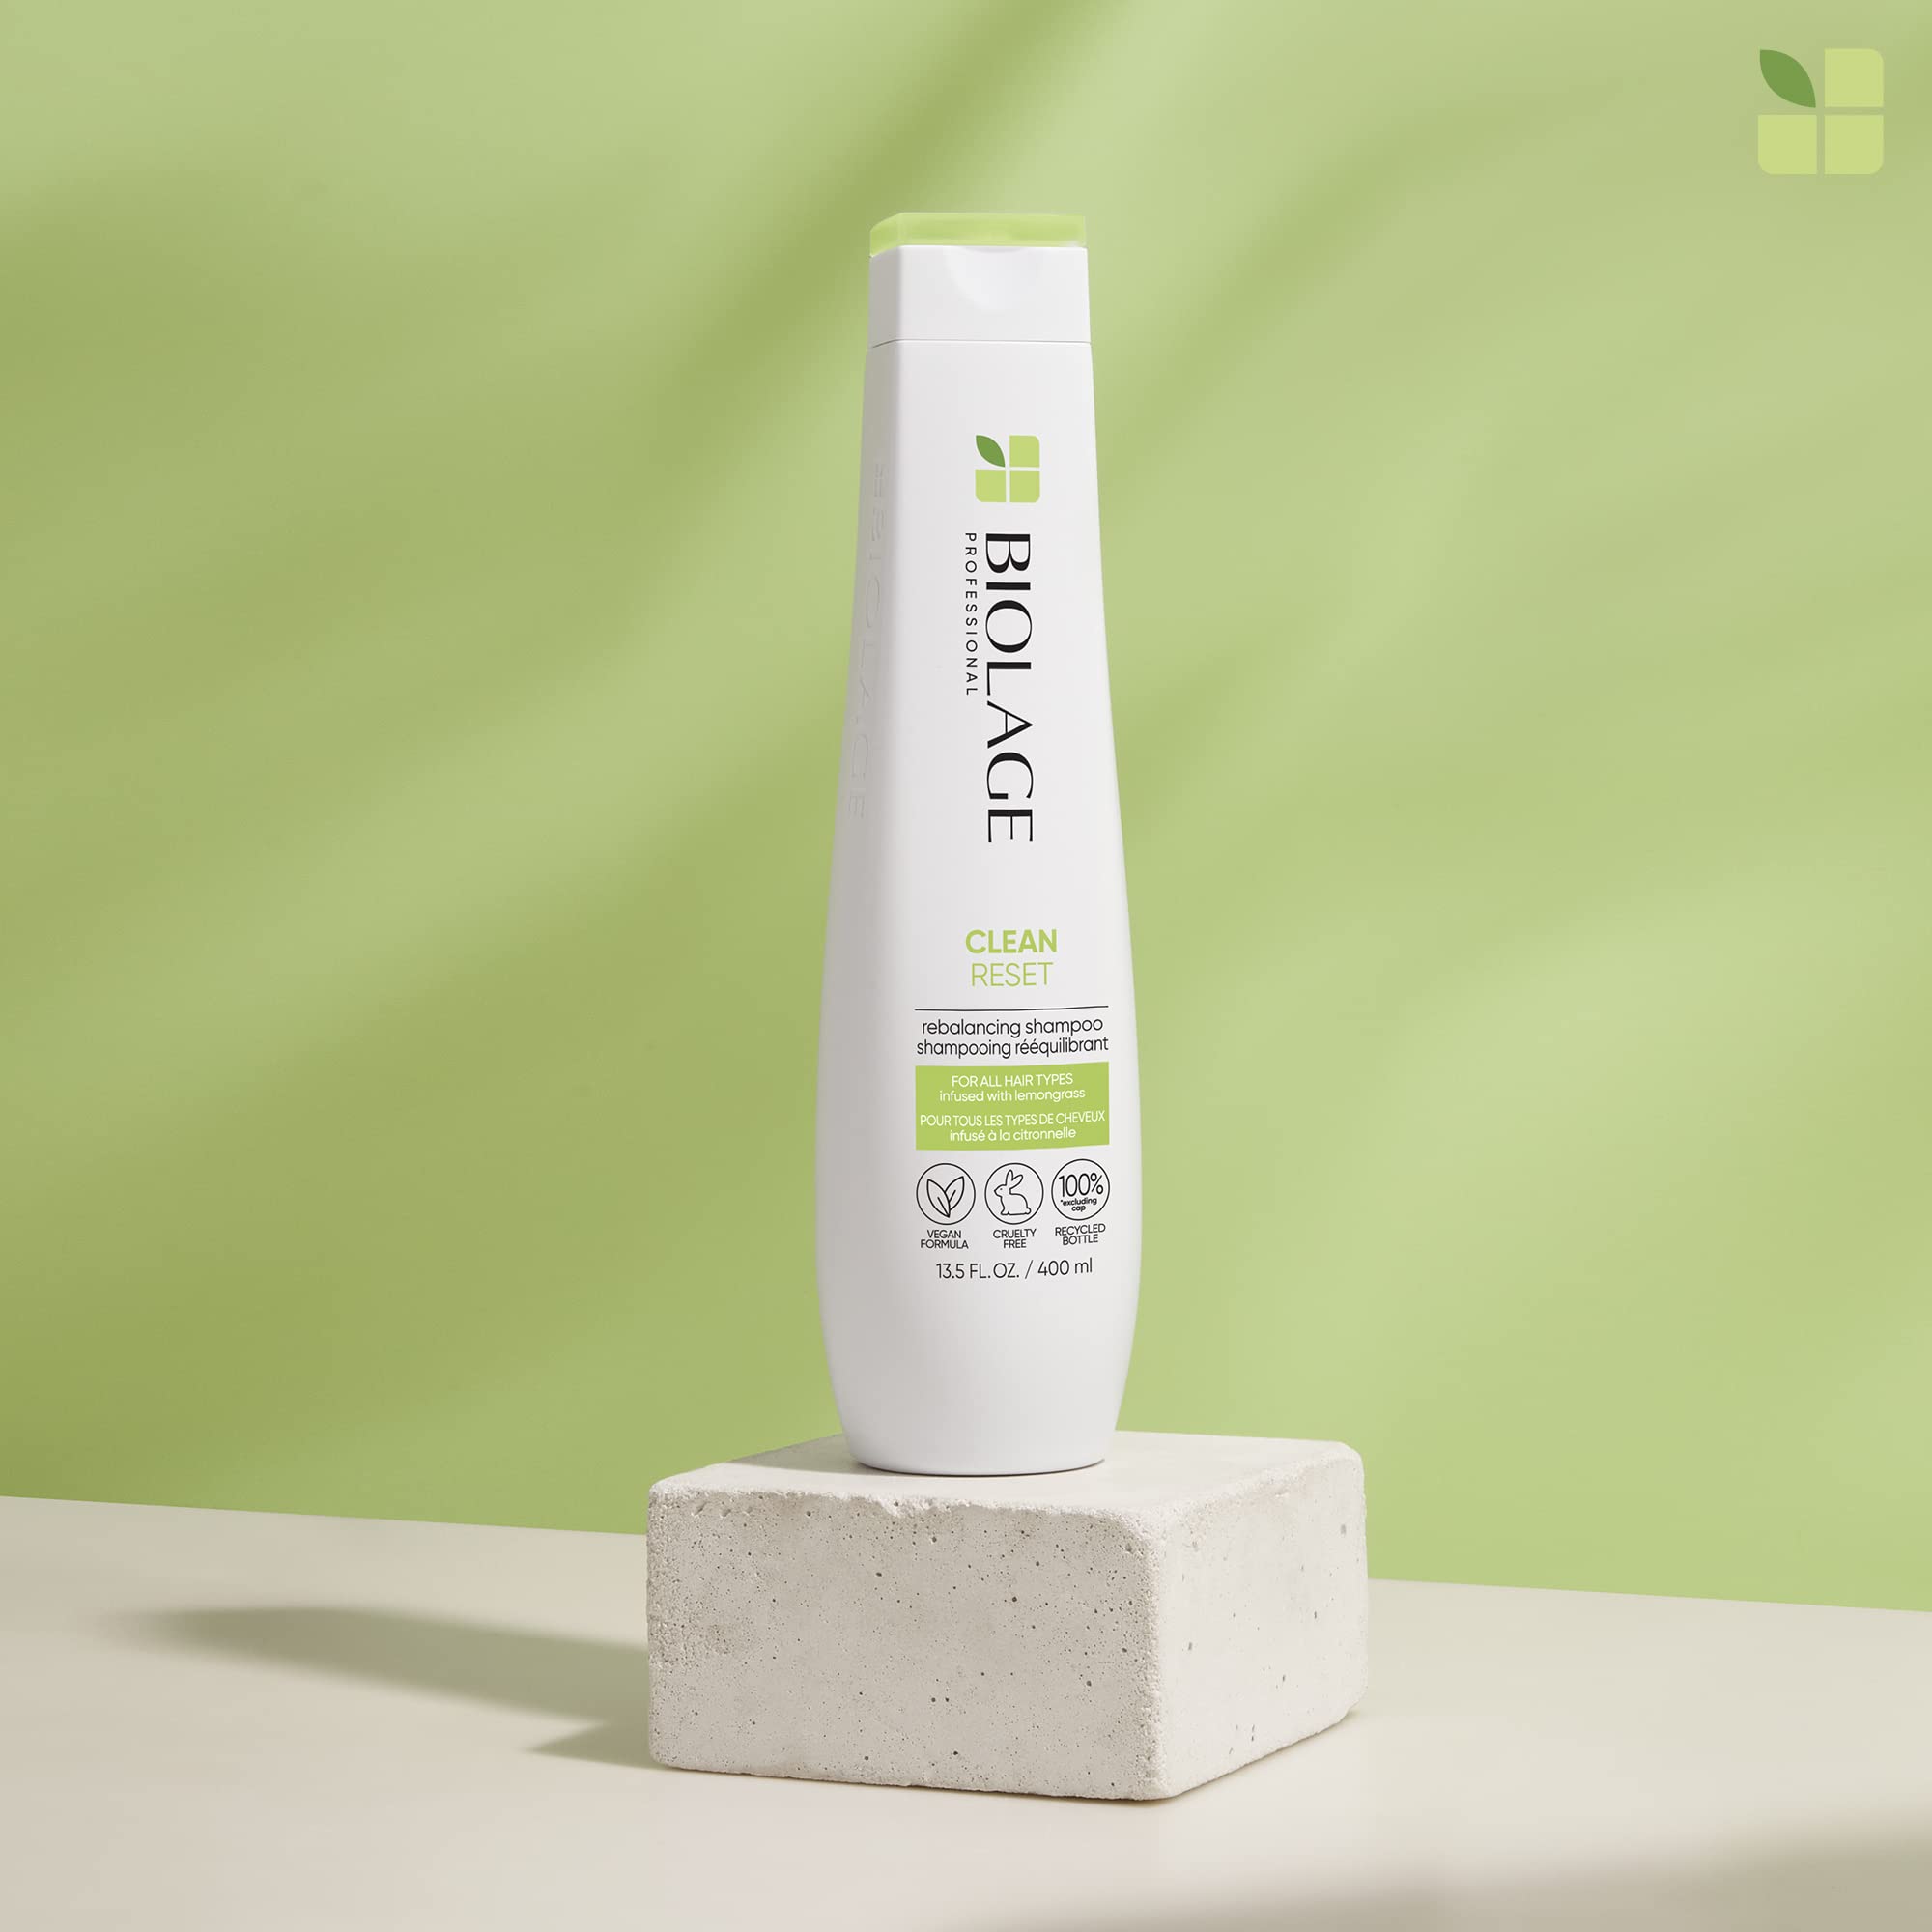 Biolage Normalizing Clean Reset Shampoo | Intense Cleansing Treatment To Remove Buildup | For All Hair Types | Paraben-Free | Vegan